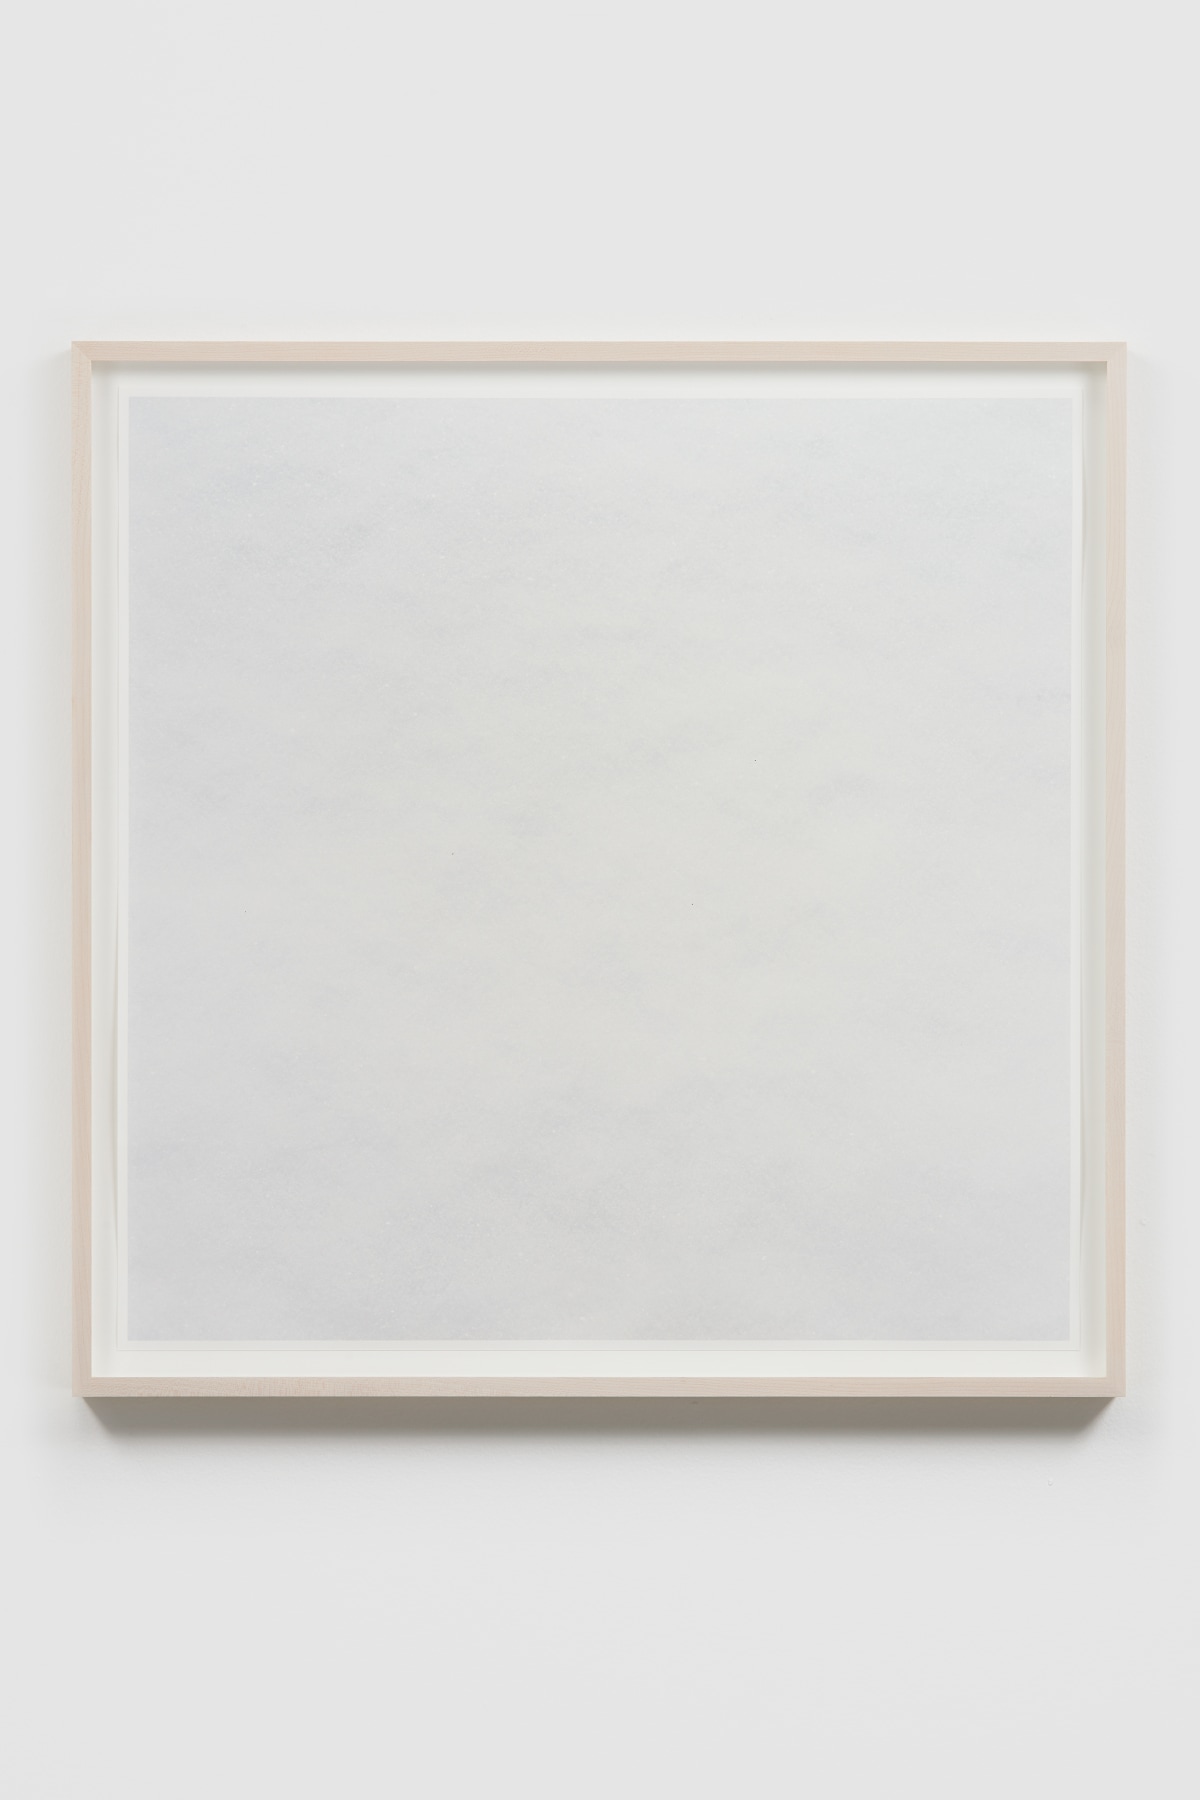 Image of SPENCER FINCH's The Impossibility of White (snow), 2018